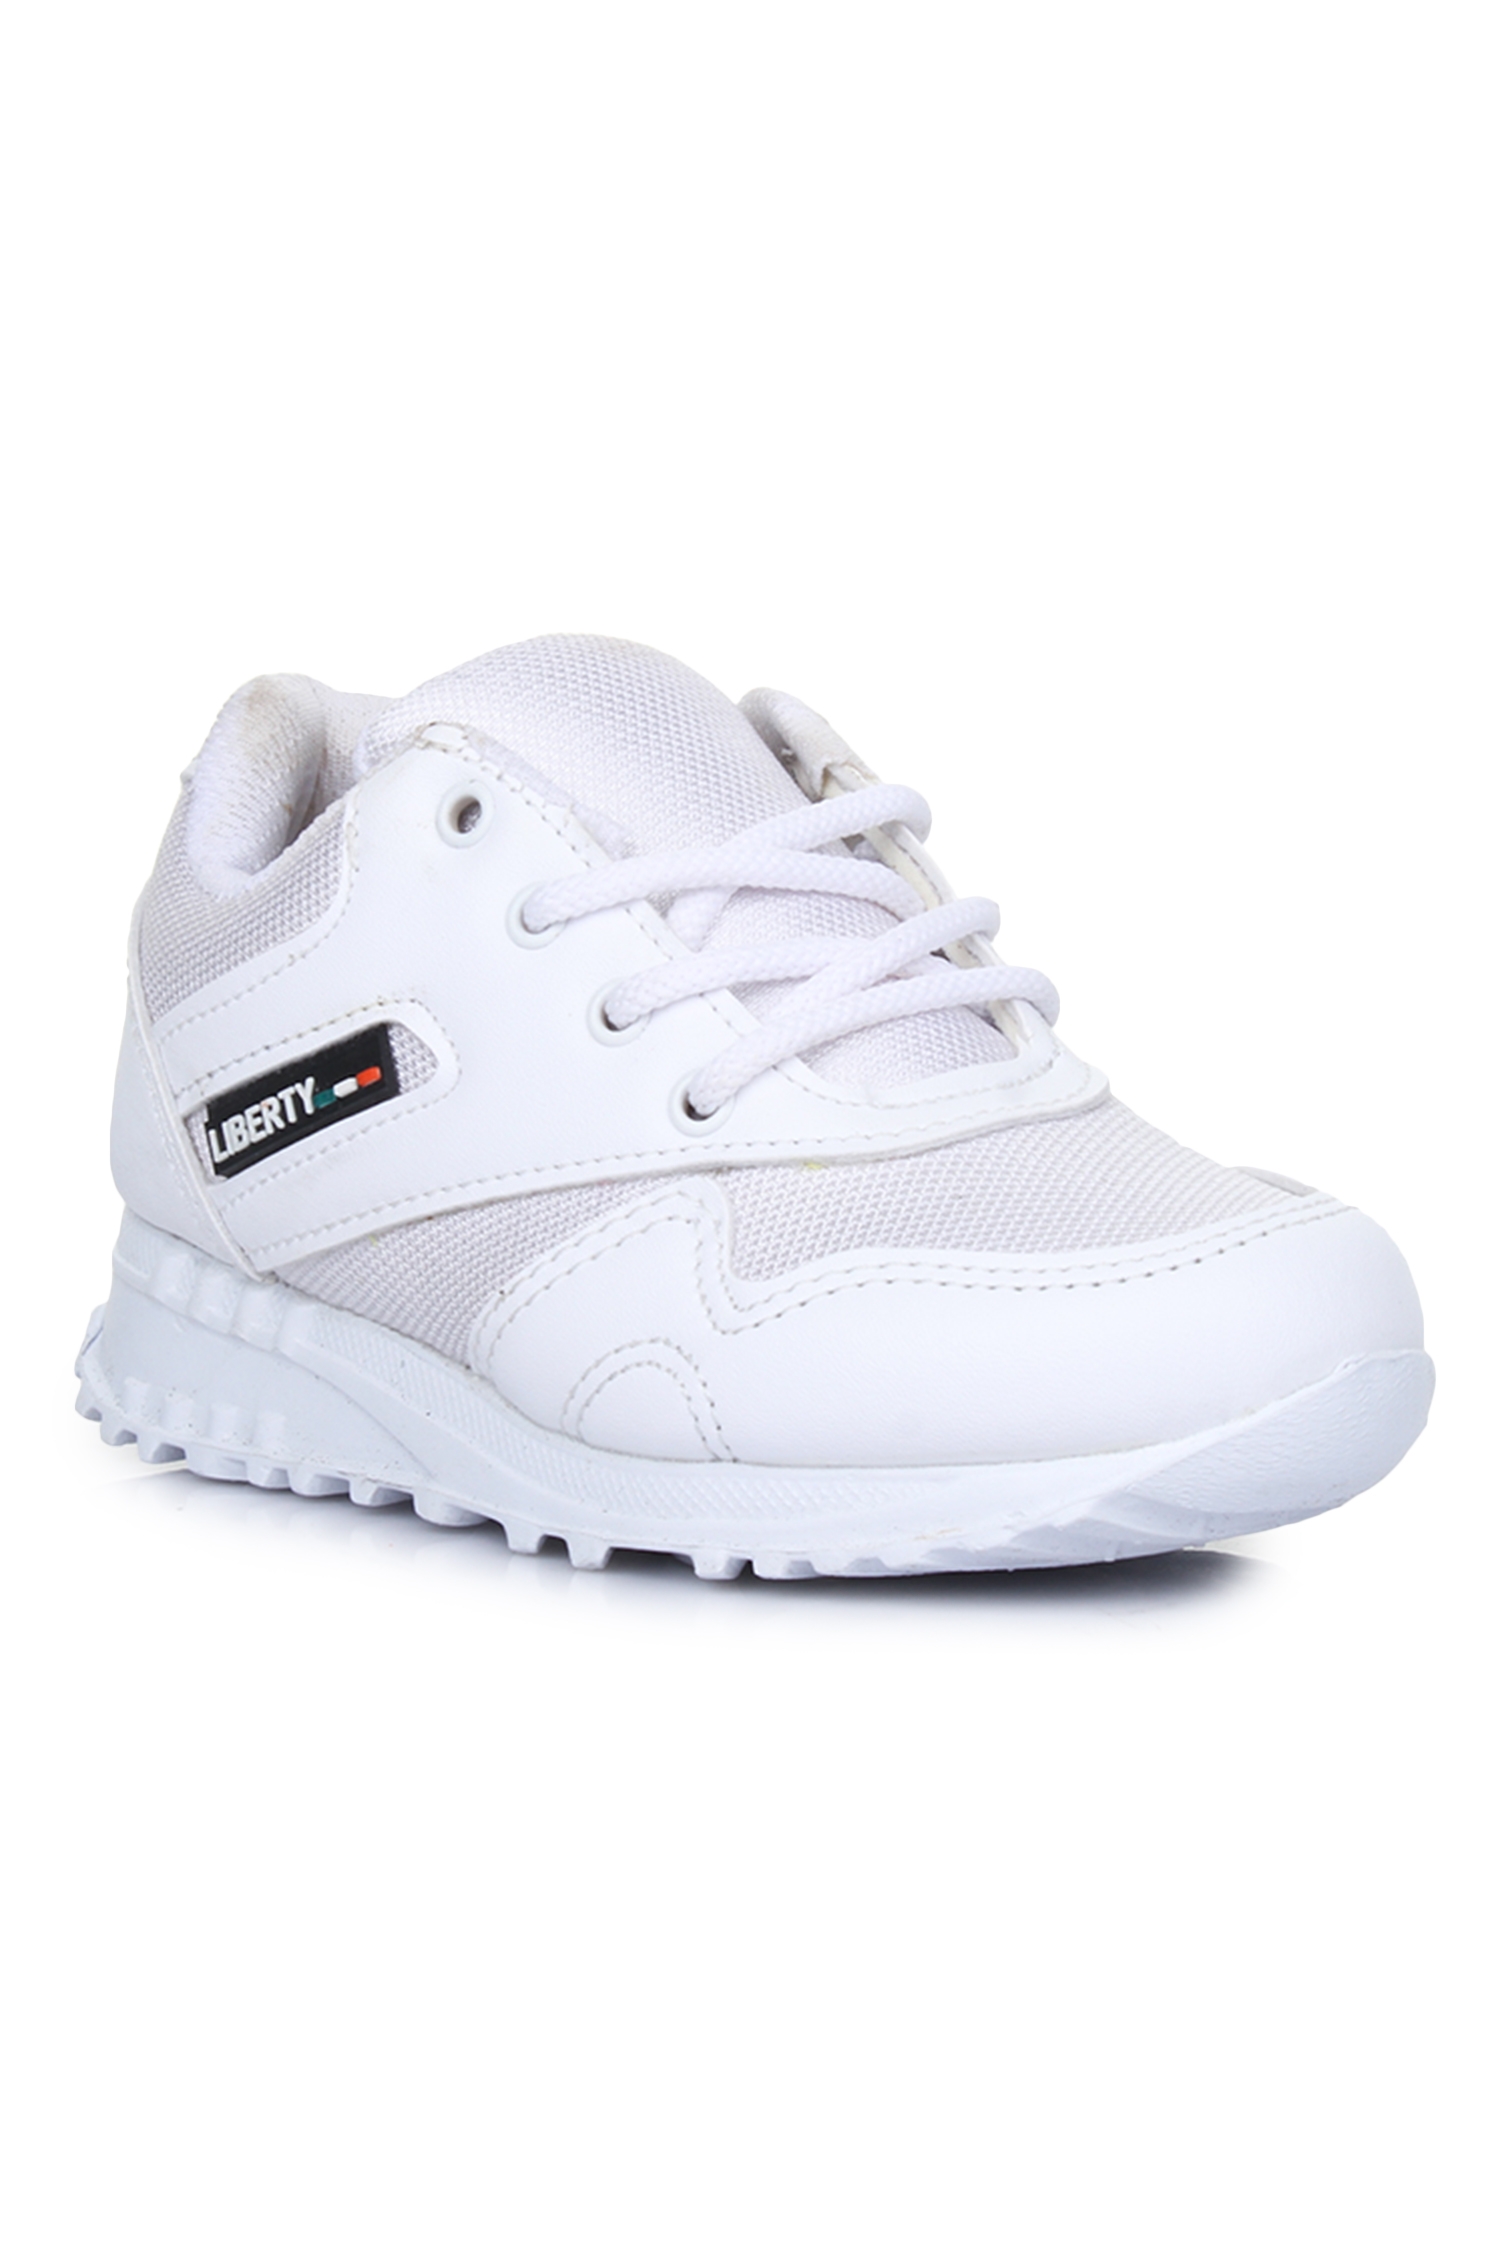 Liberty | Liberty Force 10 White School Shoes 9906-90GN_White For - Boys